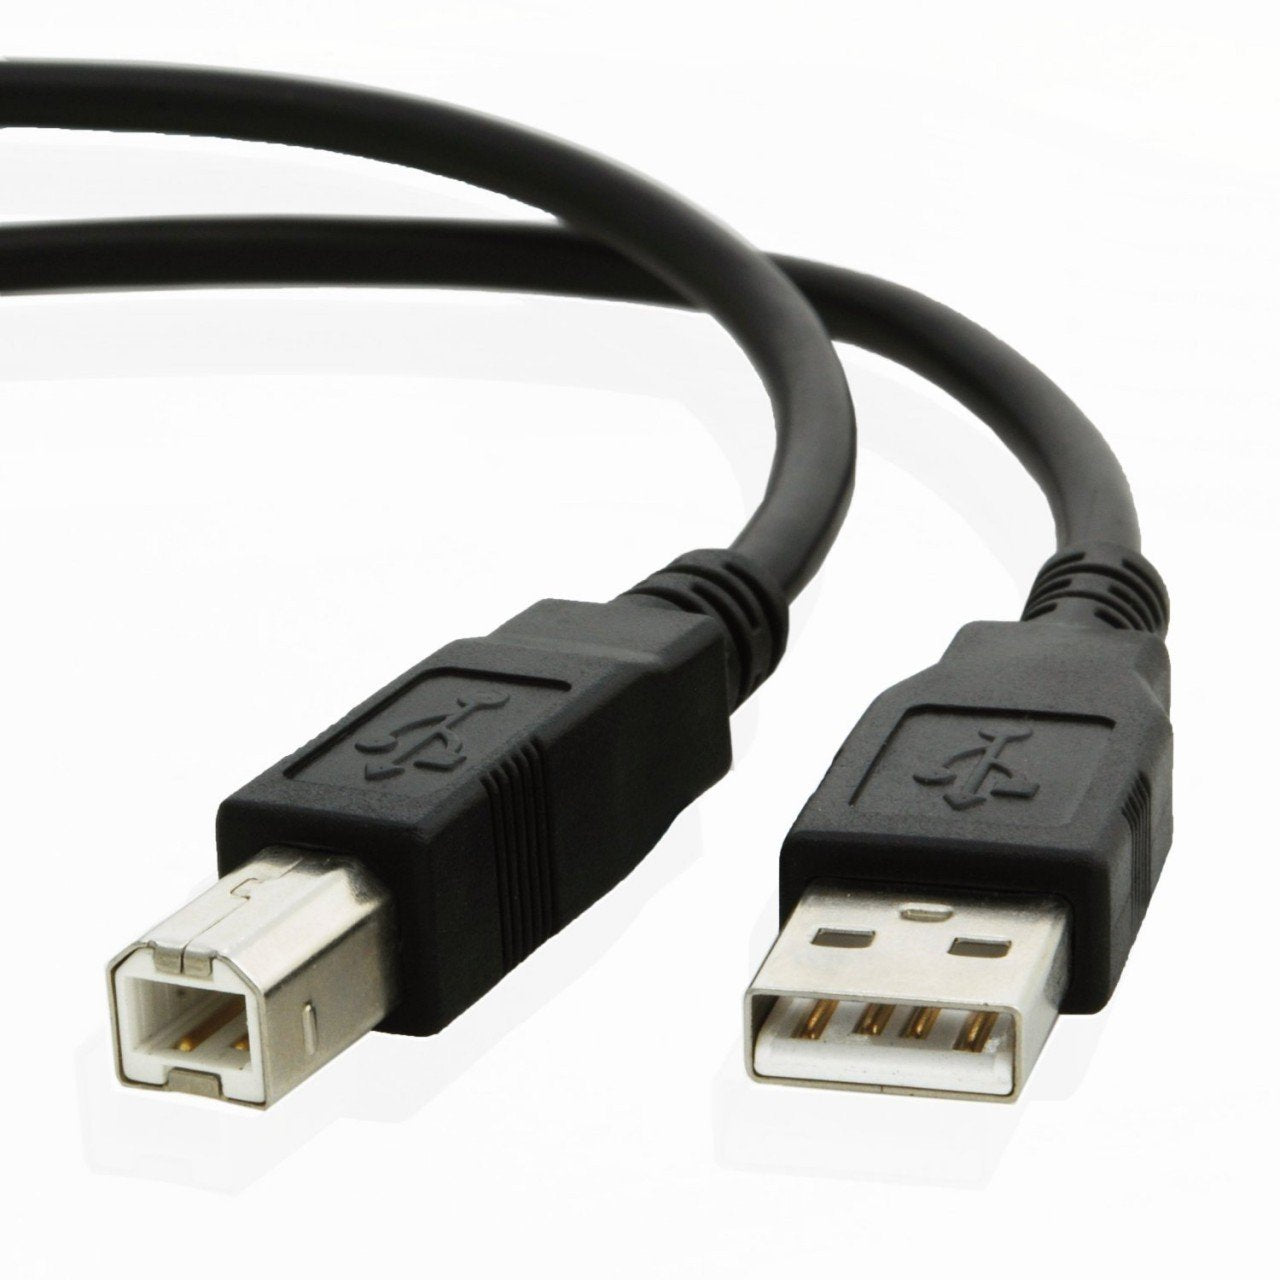 USB cable for Epson WORKFORCE WF-6530